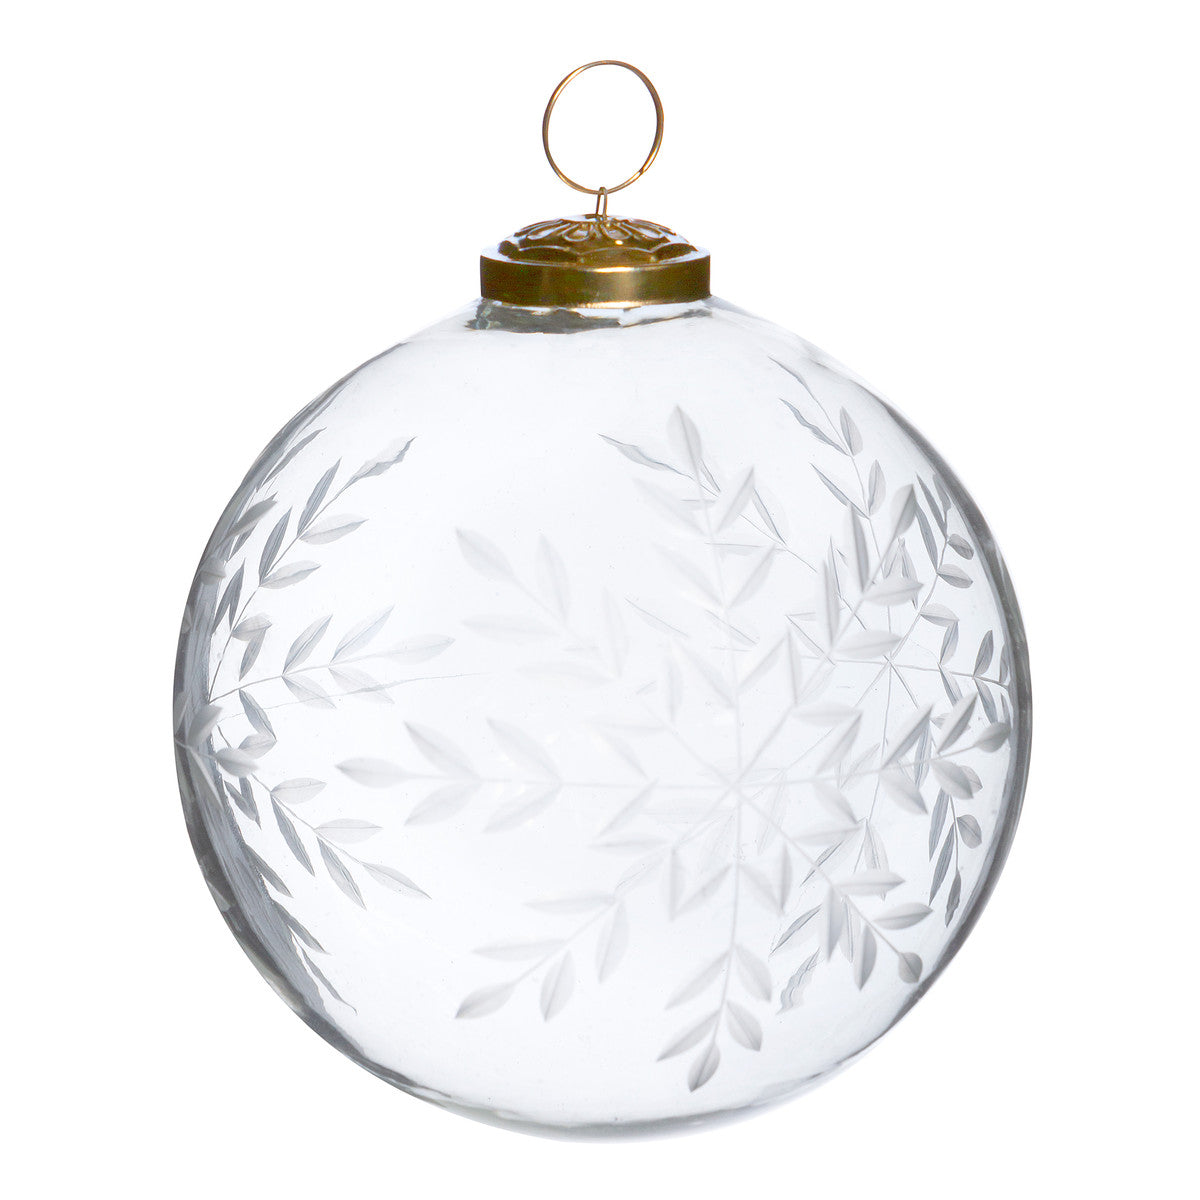 Engraved Snowflake Glass Ornament